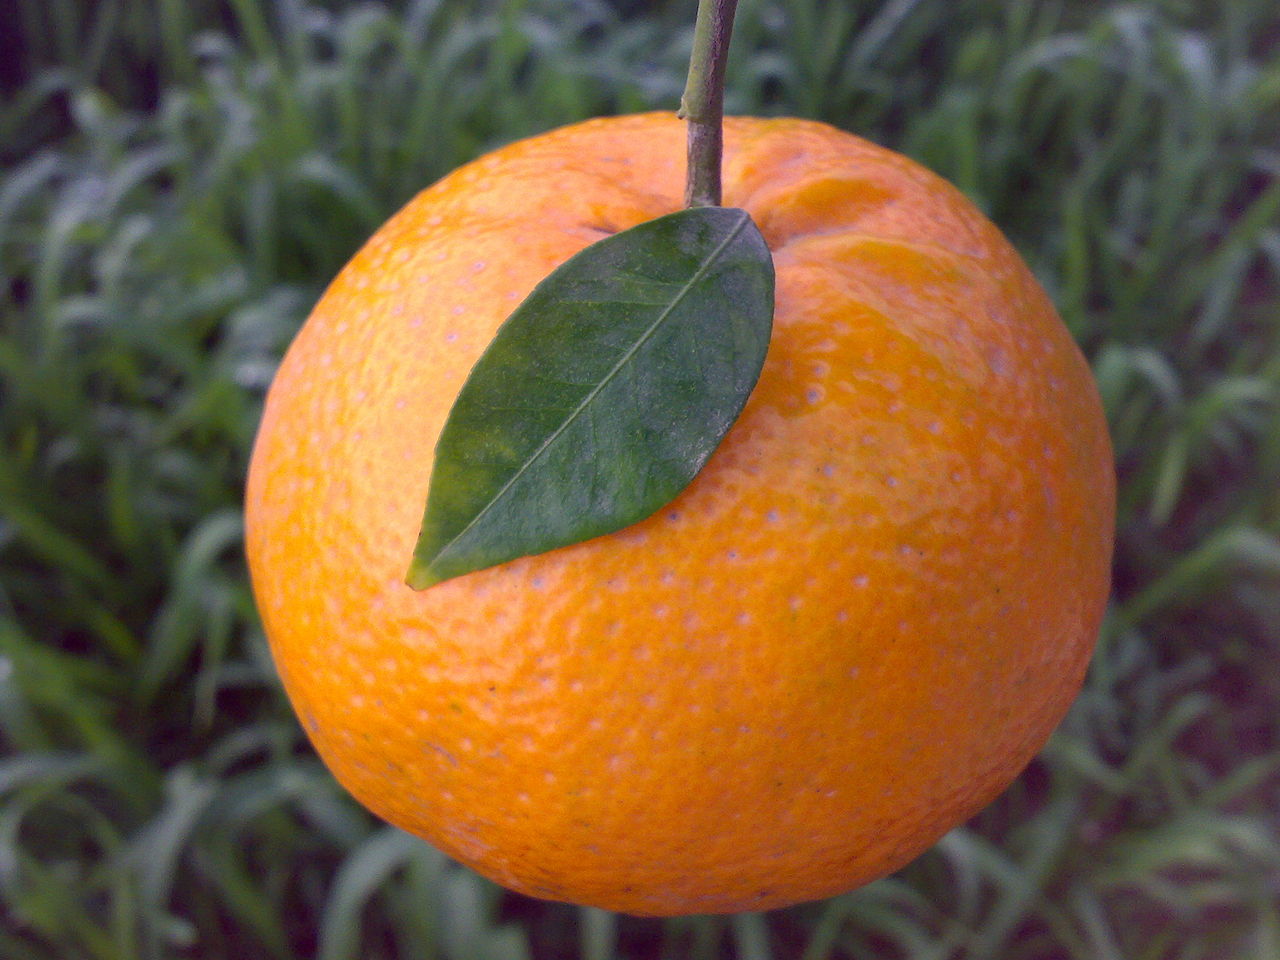 Kinnow, a variety of Mandarin orange widely cultivated in Pakistan